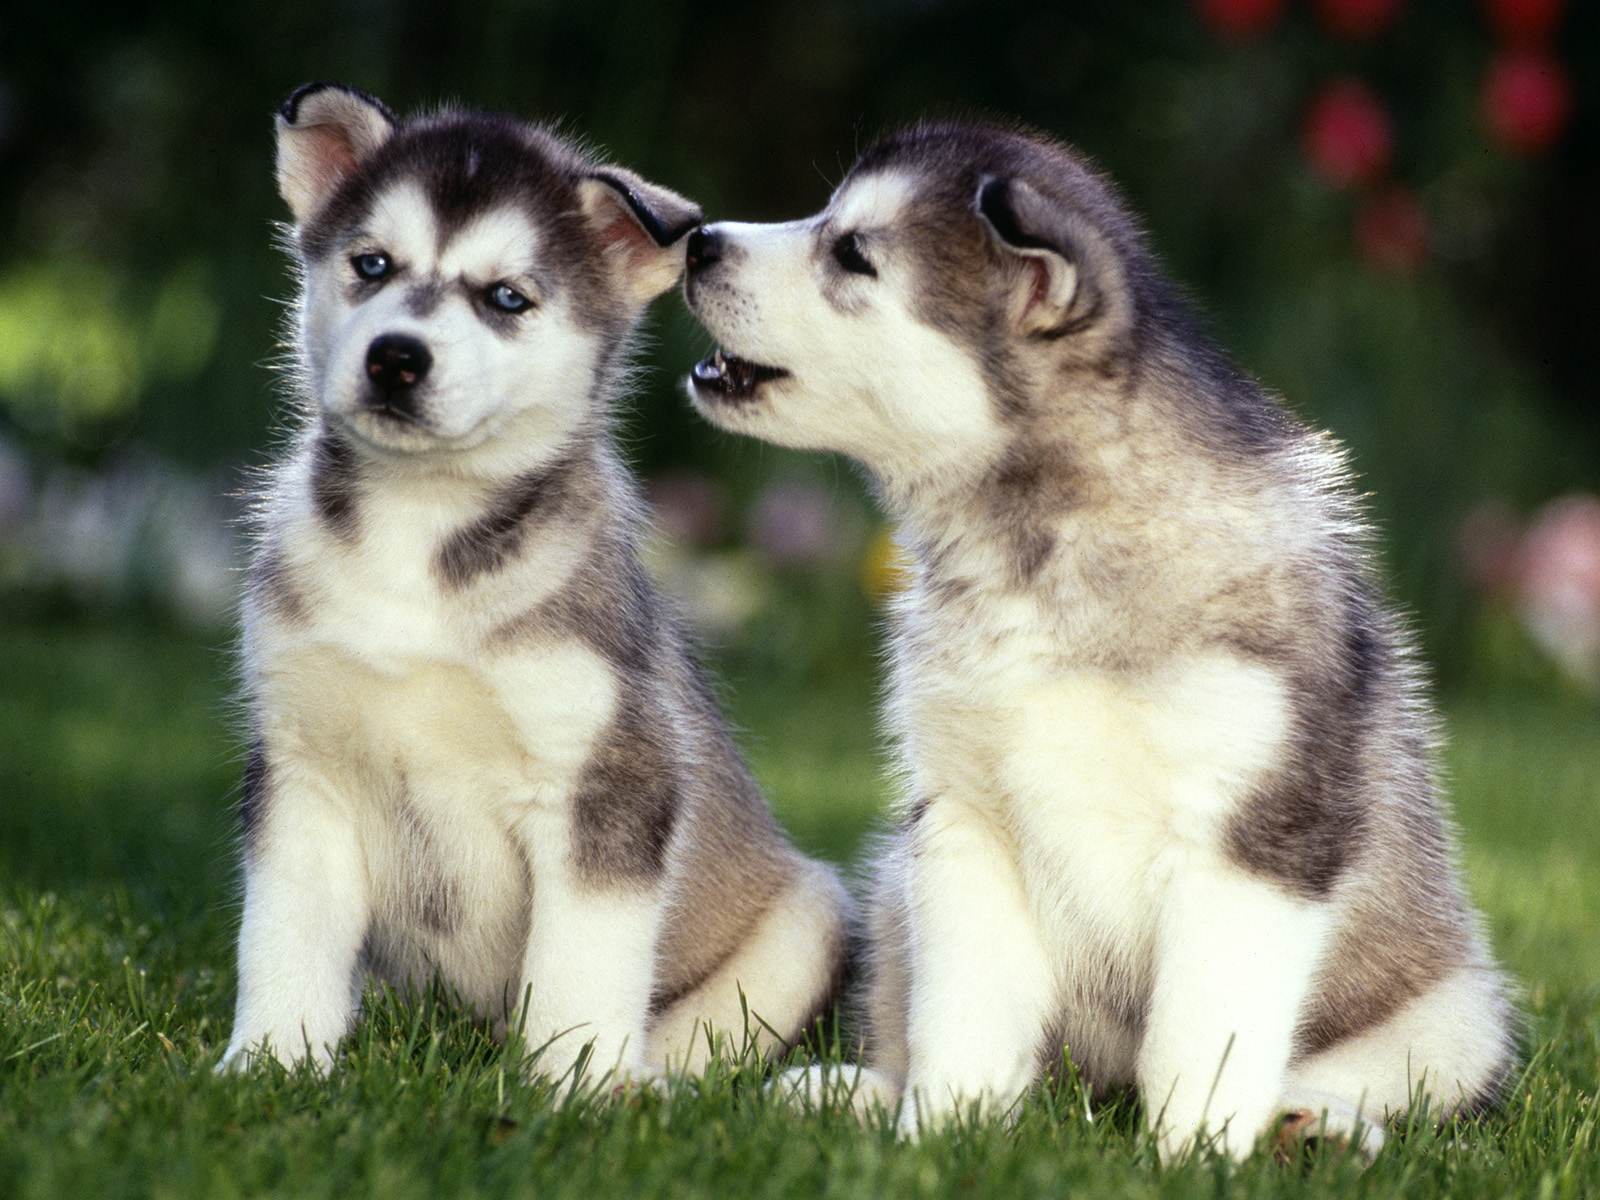 Adorable Husky Puppies - Wallpaper, High Definition, High Quality